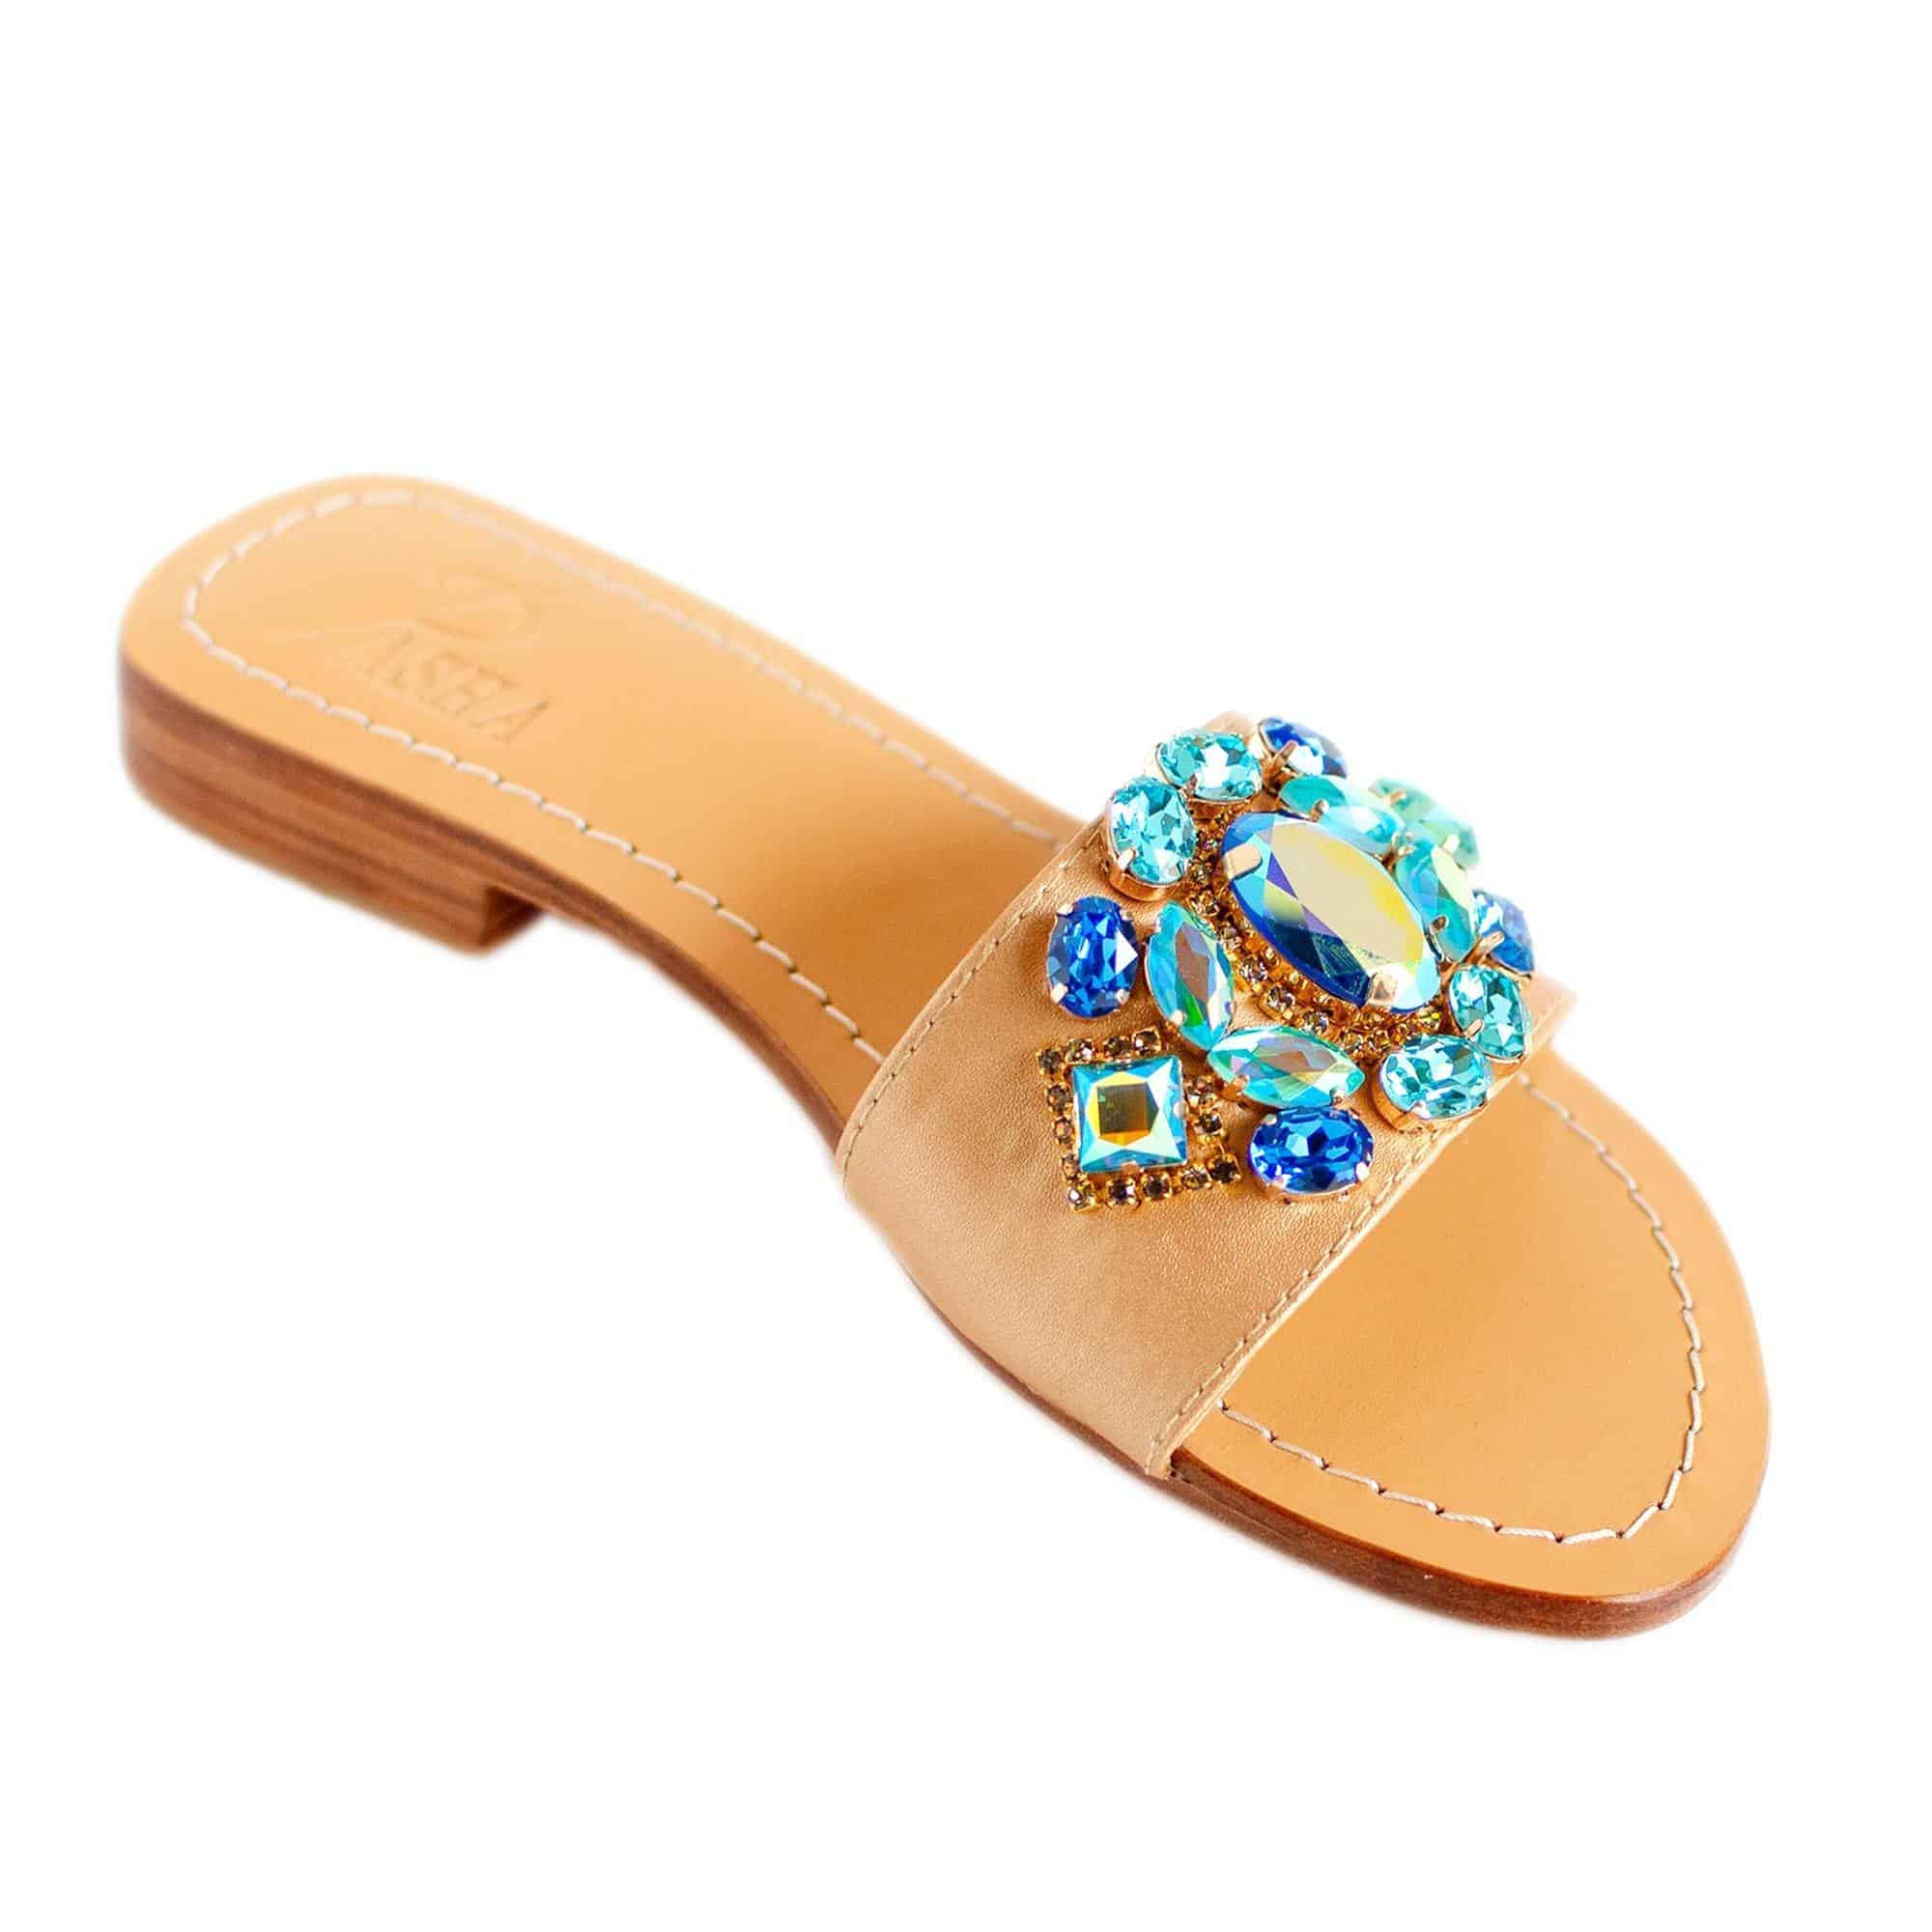 MANTEO - Pasha Sandals - Jewelry for your feet - 